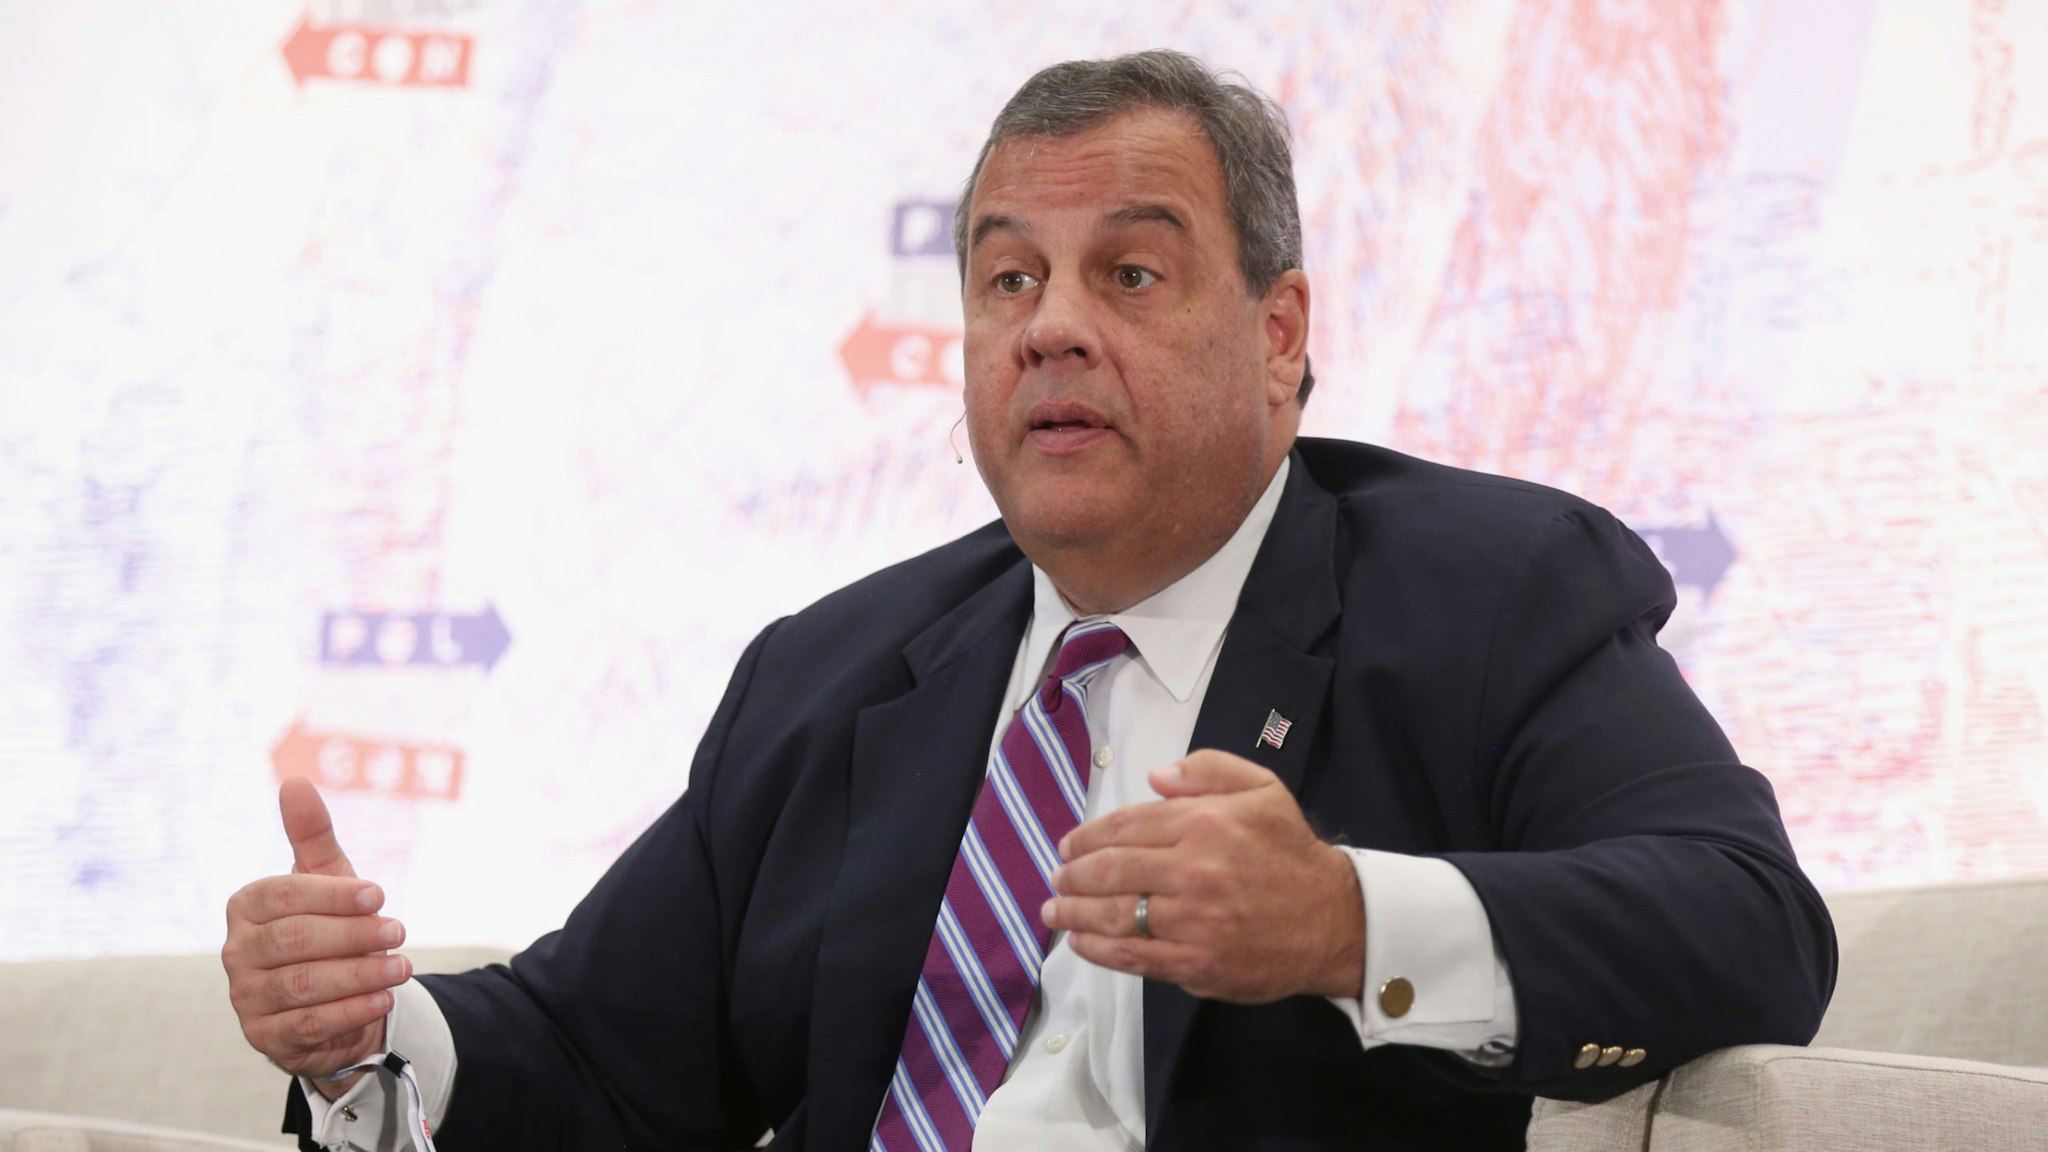 Chris Christie speaks onstage during Politicon 2018 at Los Angeles Convention Center on October 20, 2018 in Los Angeles, California.